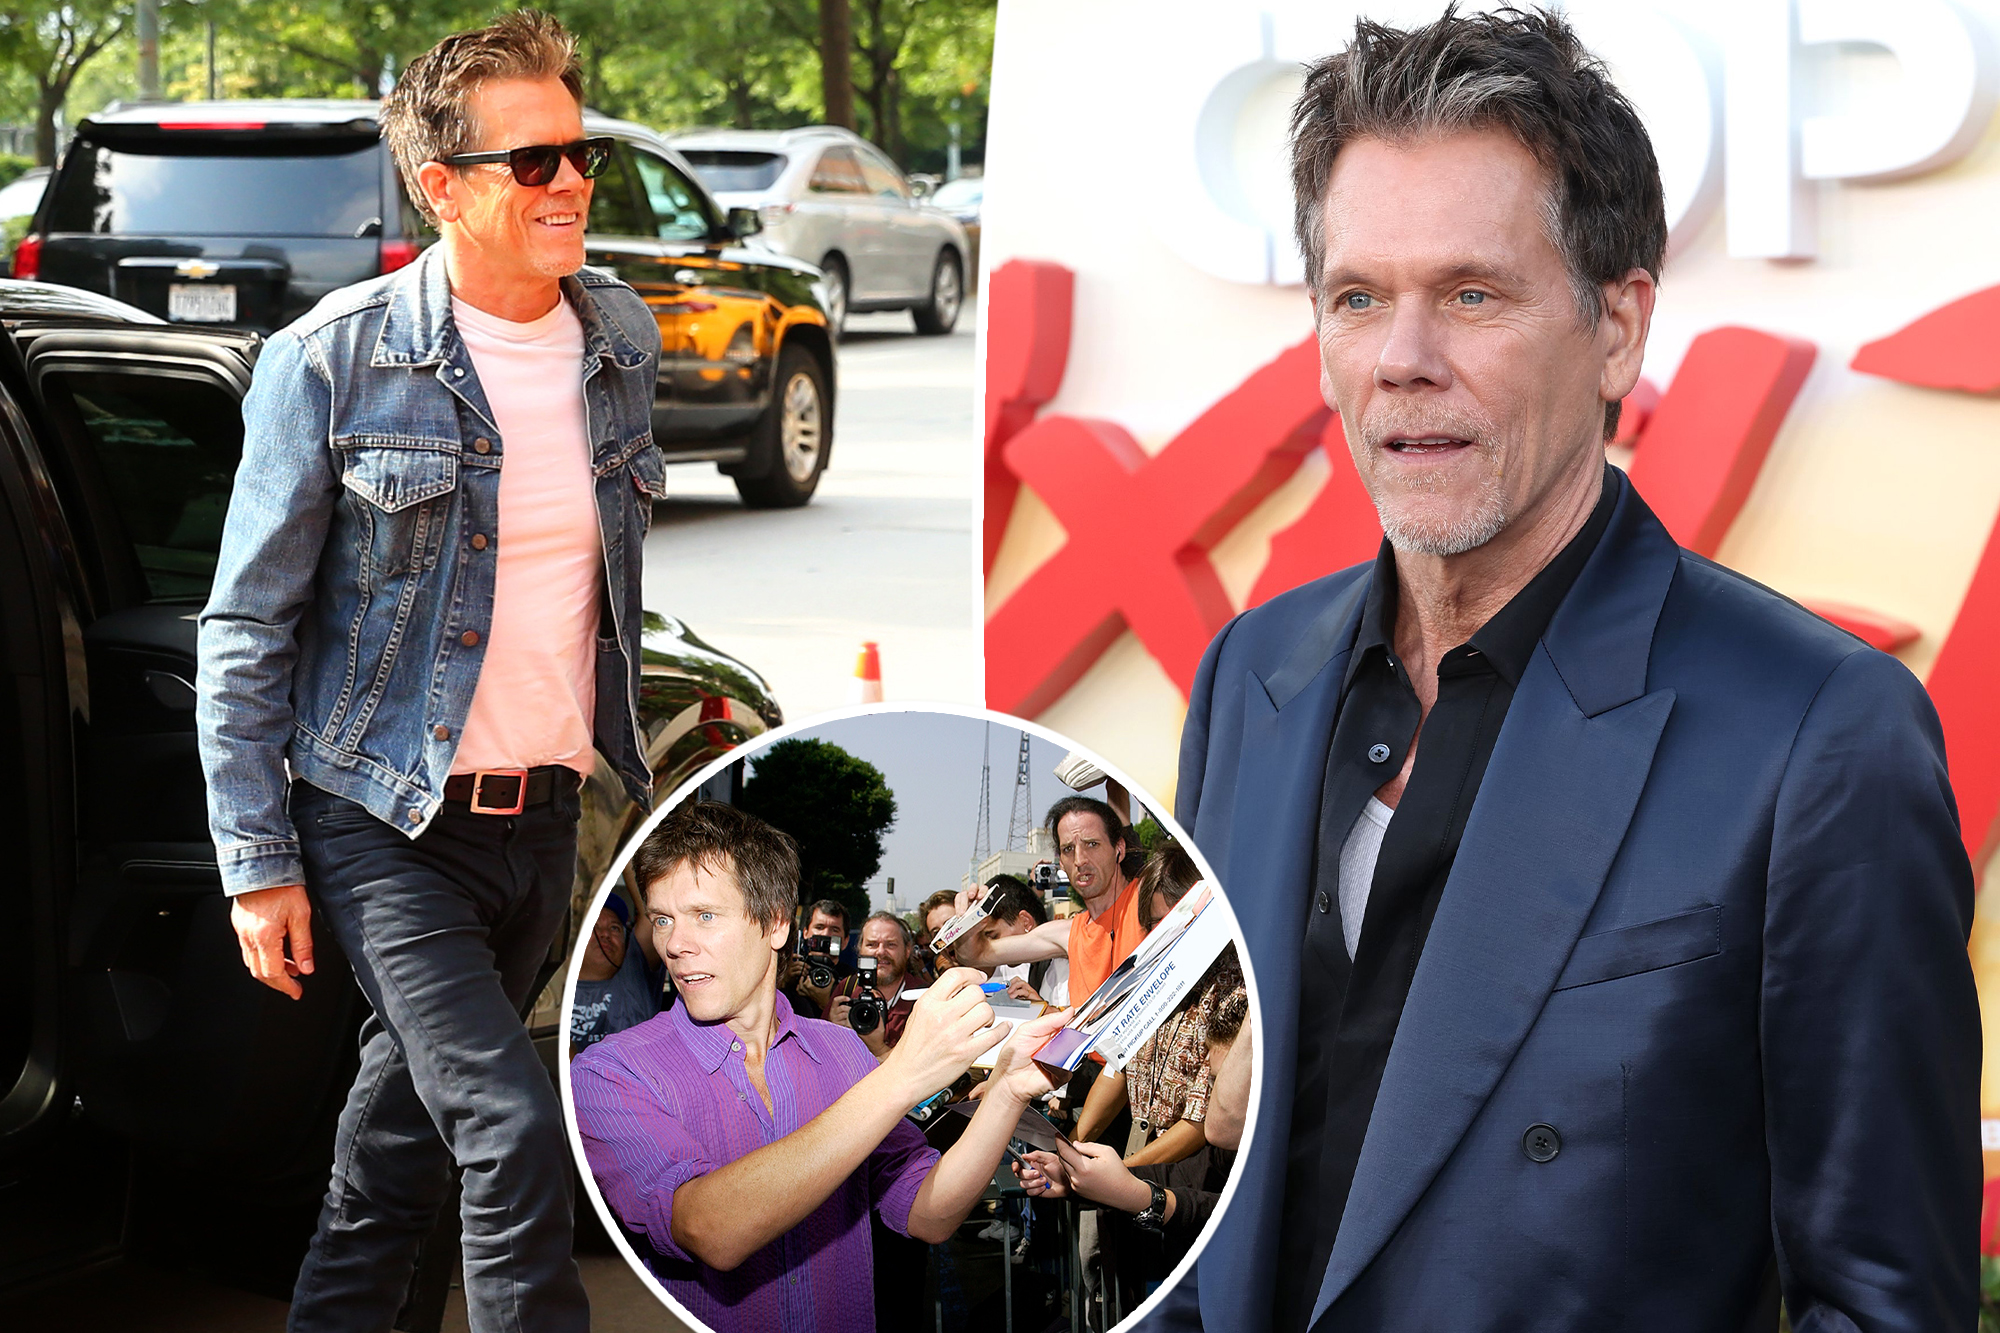 Kevin Bacon's Hilarious Attempt at Being Normal Goes Awry: 